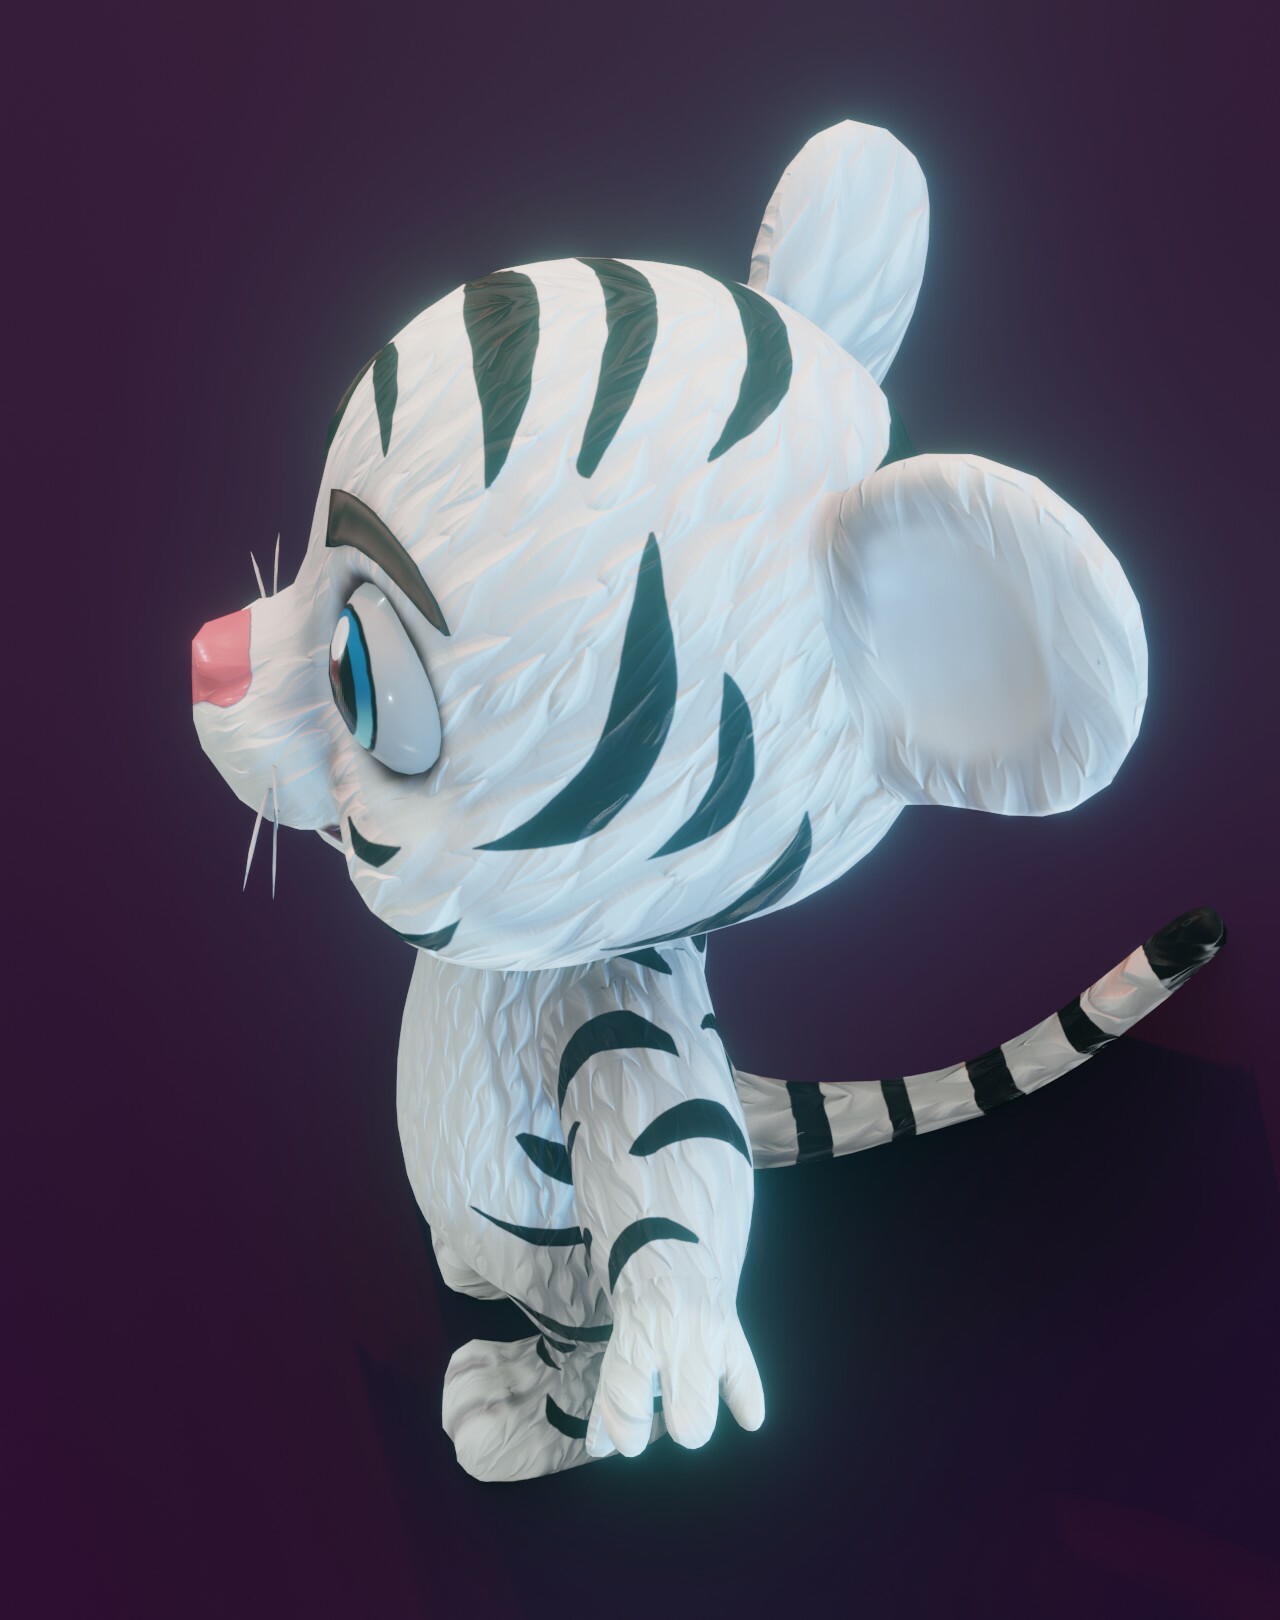 Cartoon Tiger Animated 3D Model in Characters - UE Marketplace